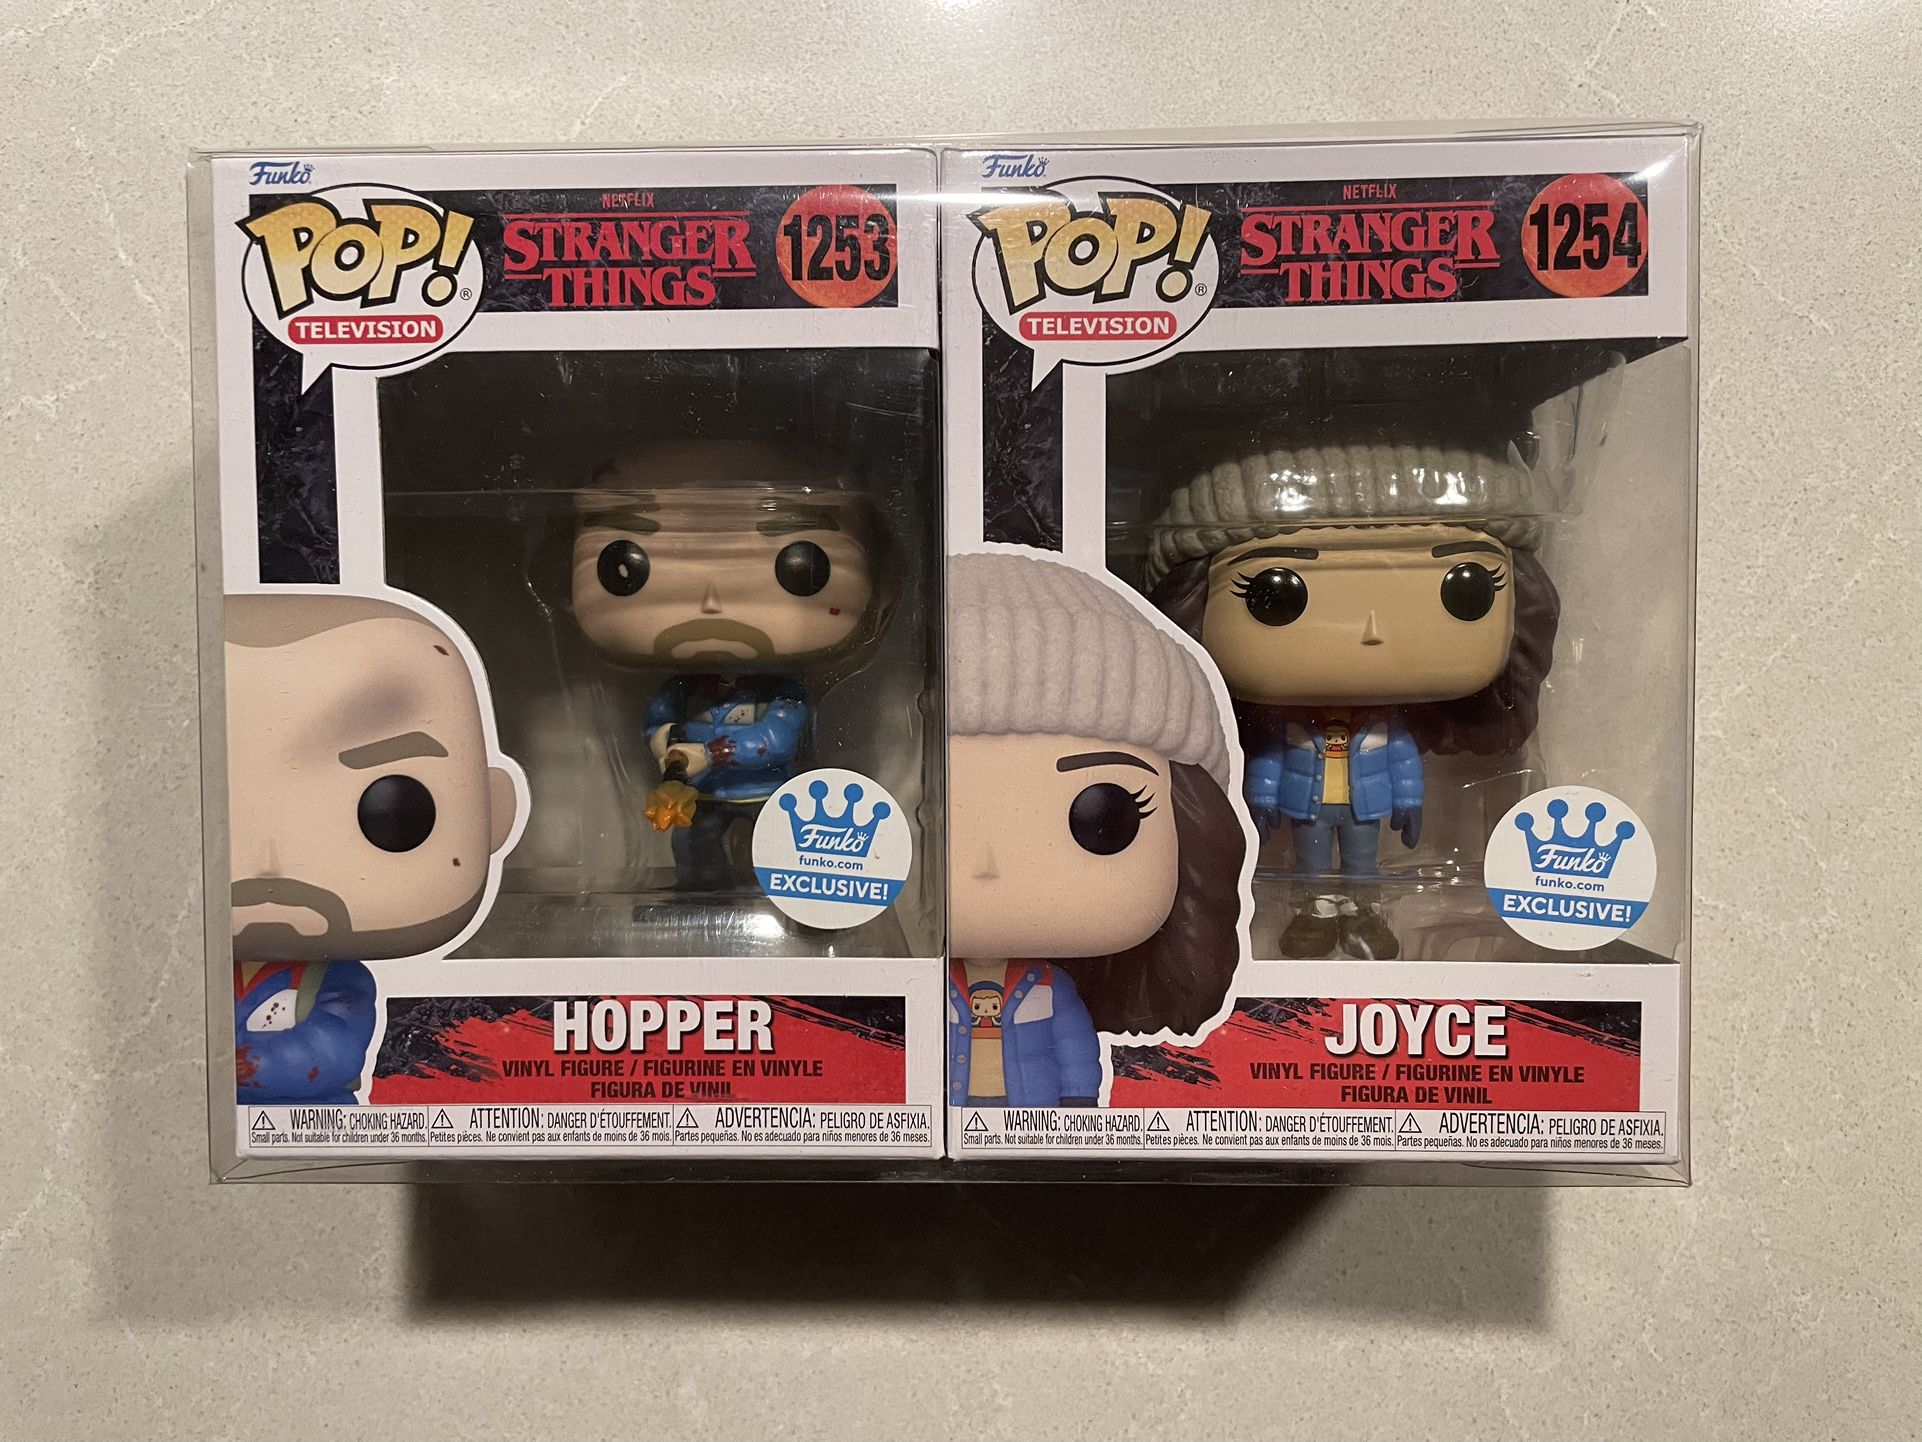 Hopper & Joyce Funko Pop Set *MINT* Online Shop Exclusive Flamethrower Stranger Things 1253 with protector Netflix Television